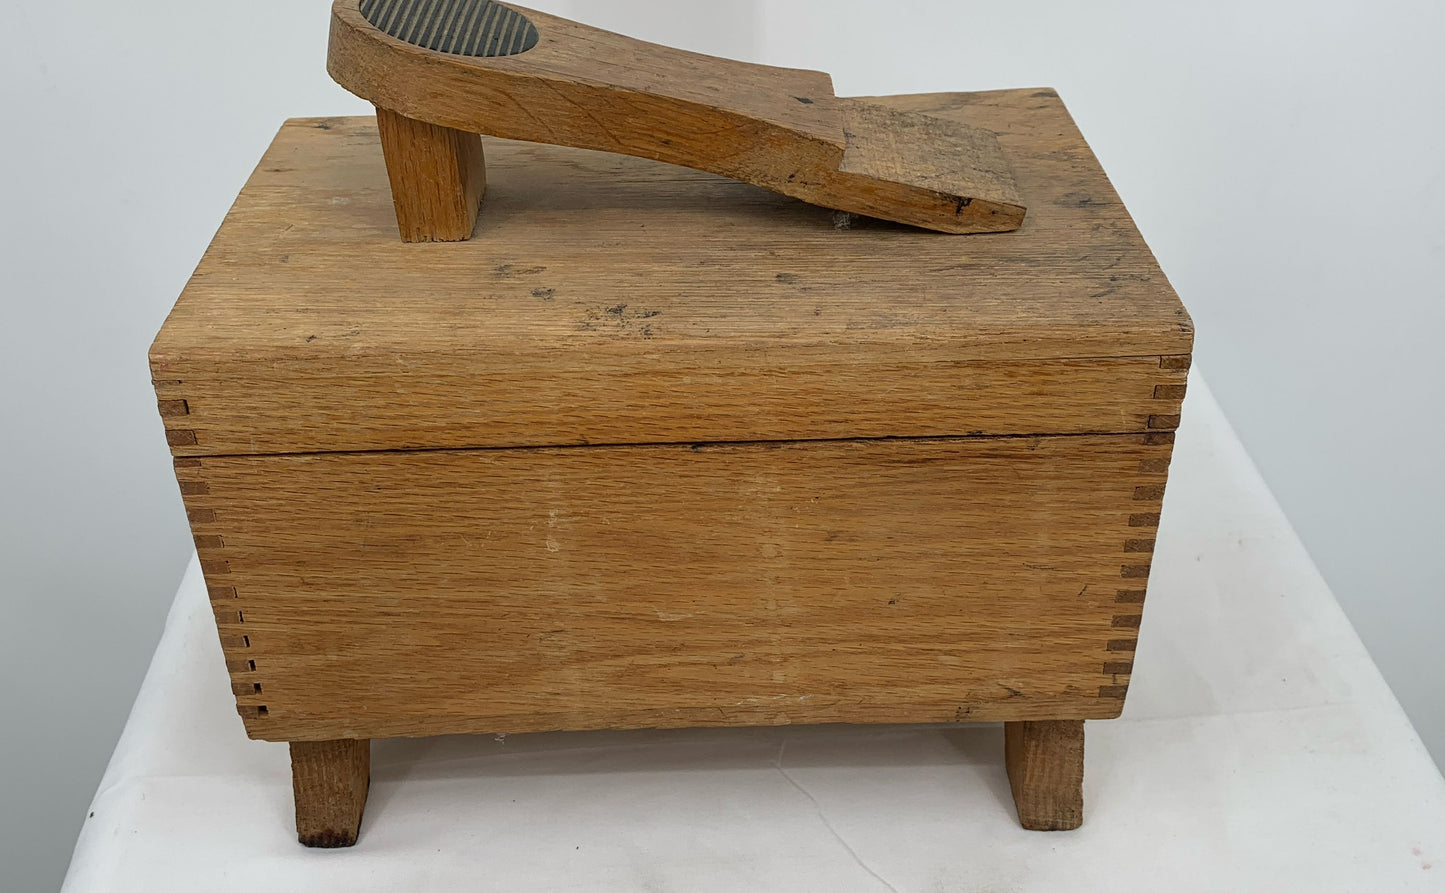 Vintage Cavalier Company Footed Wood Shoe Shine Box With Latch